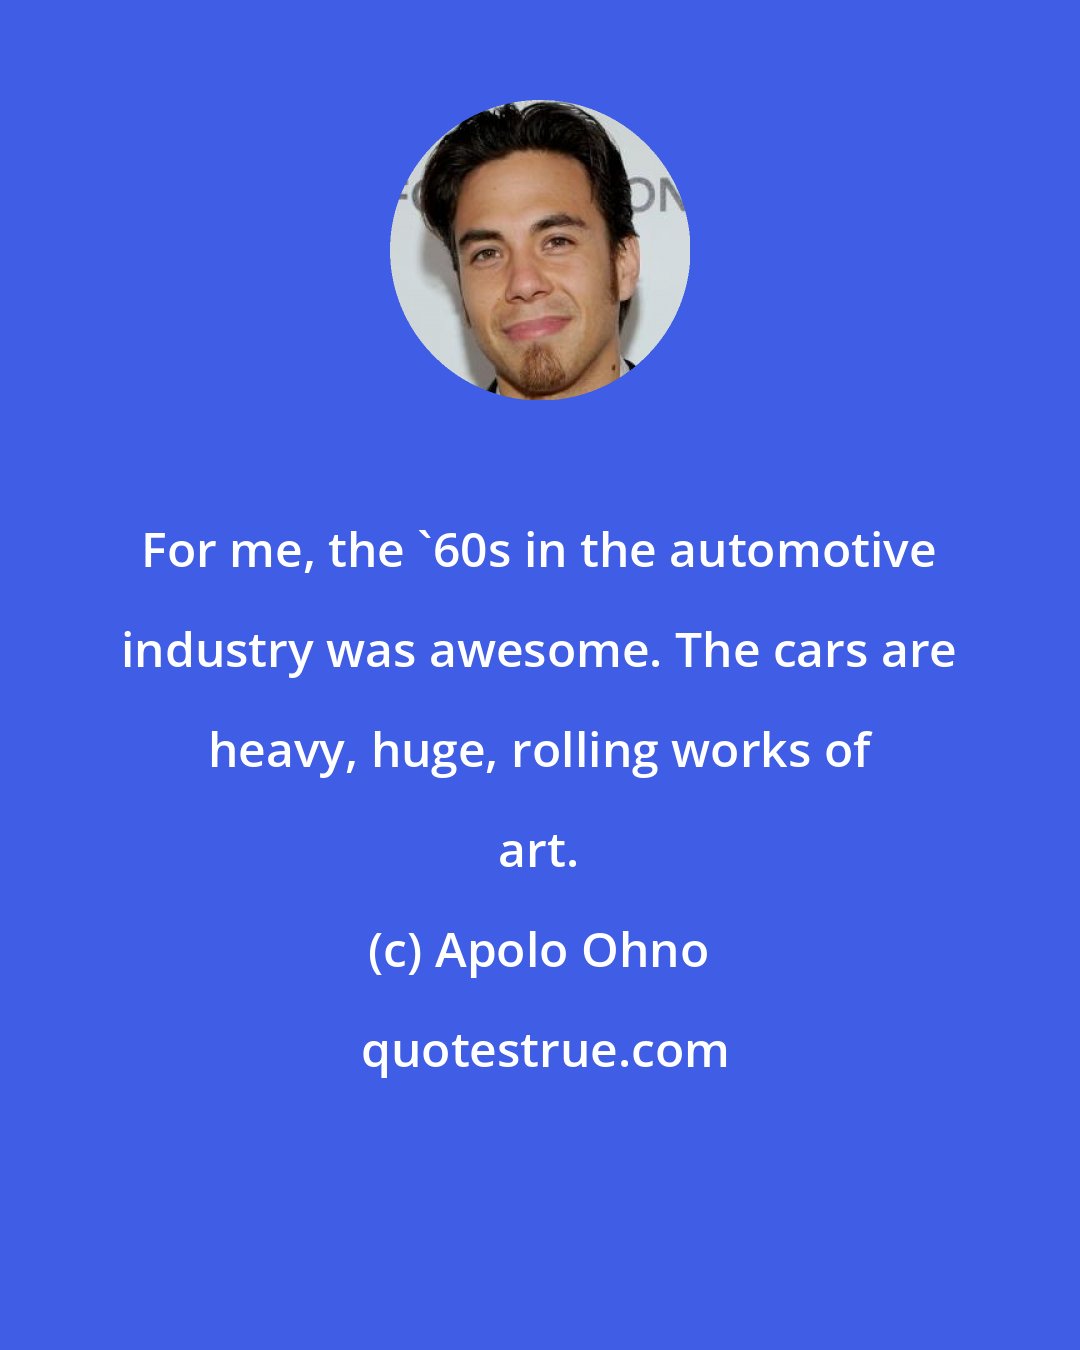 Apolo Ohno: For me, the '60s in the automotive industry was awesome. The cars are heavy, huge, rolling works of art.